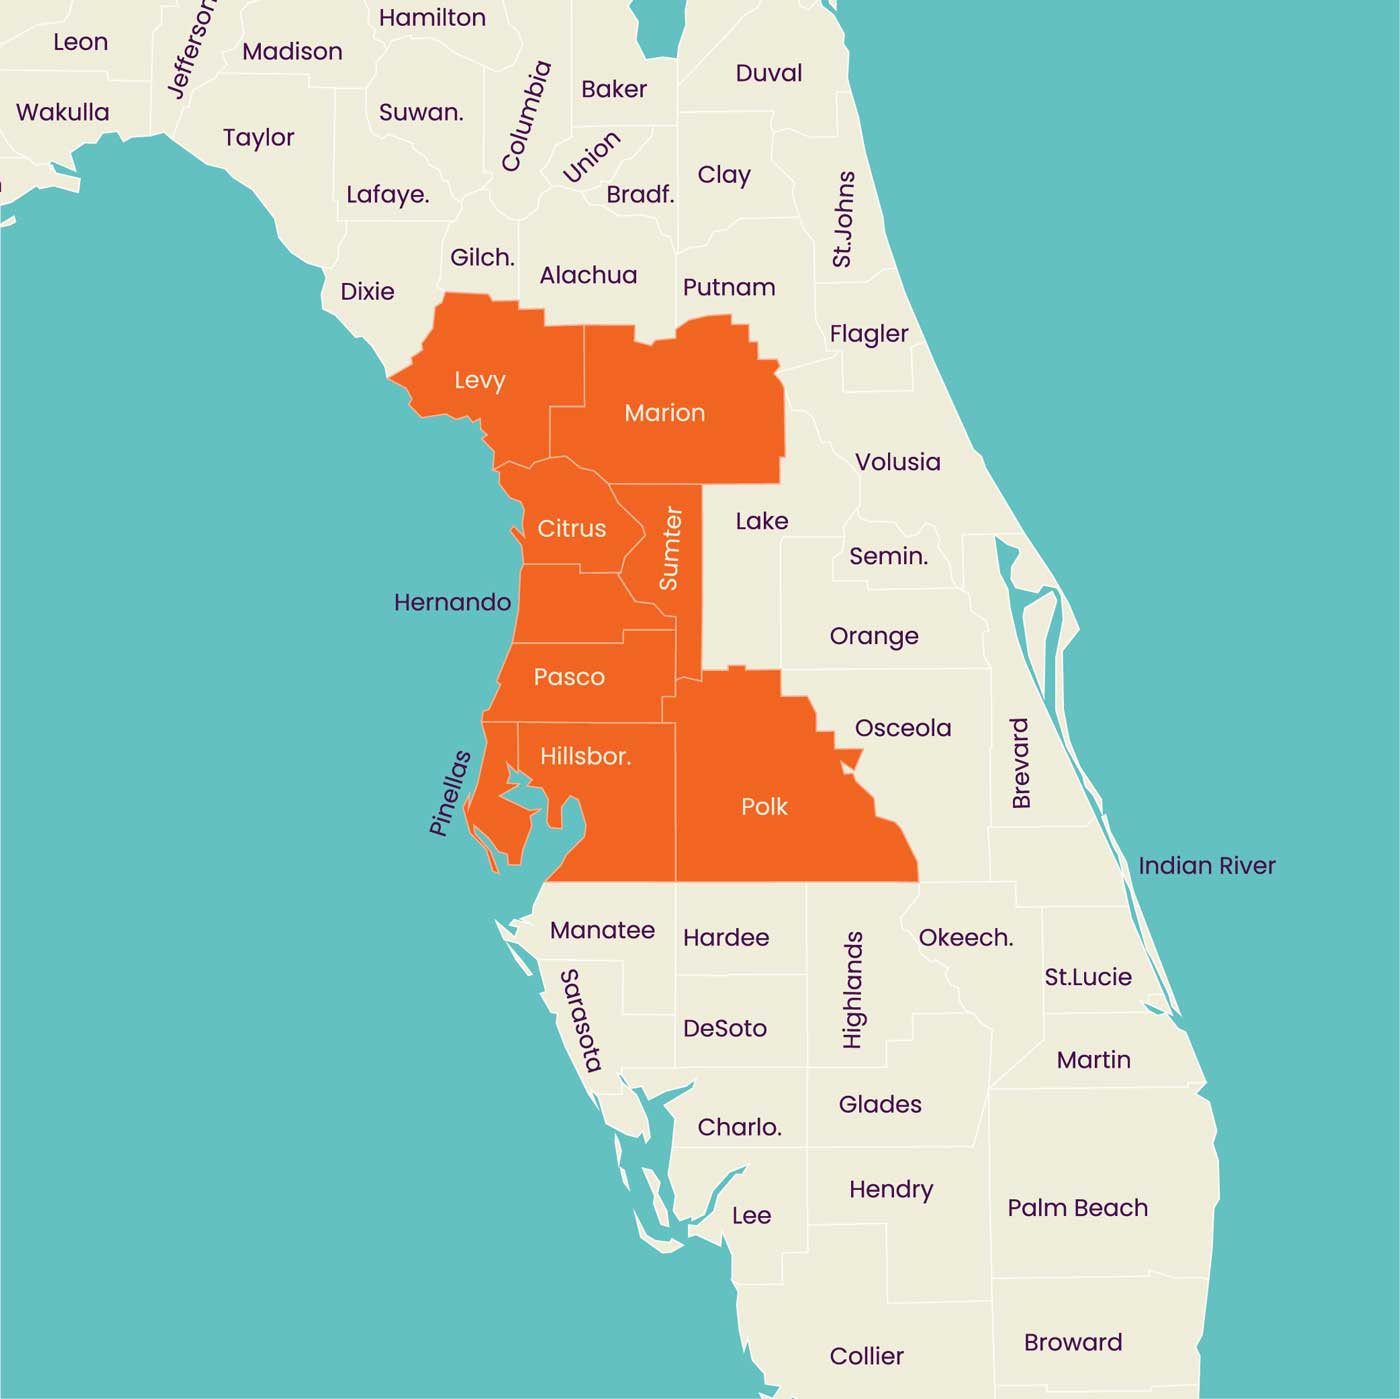 Map of the state of Florida, showing certain counties highlighted in orange.